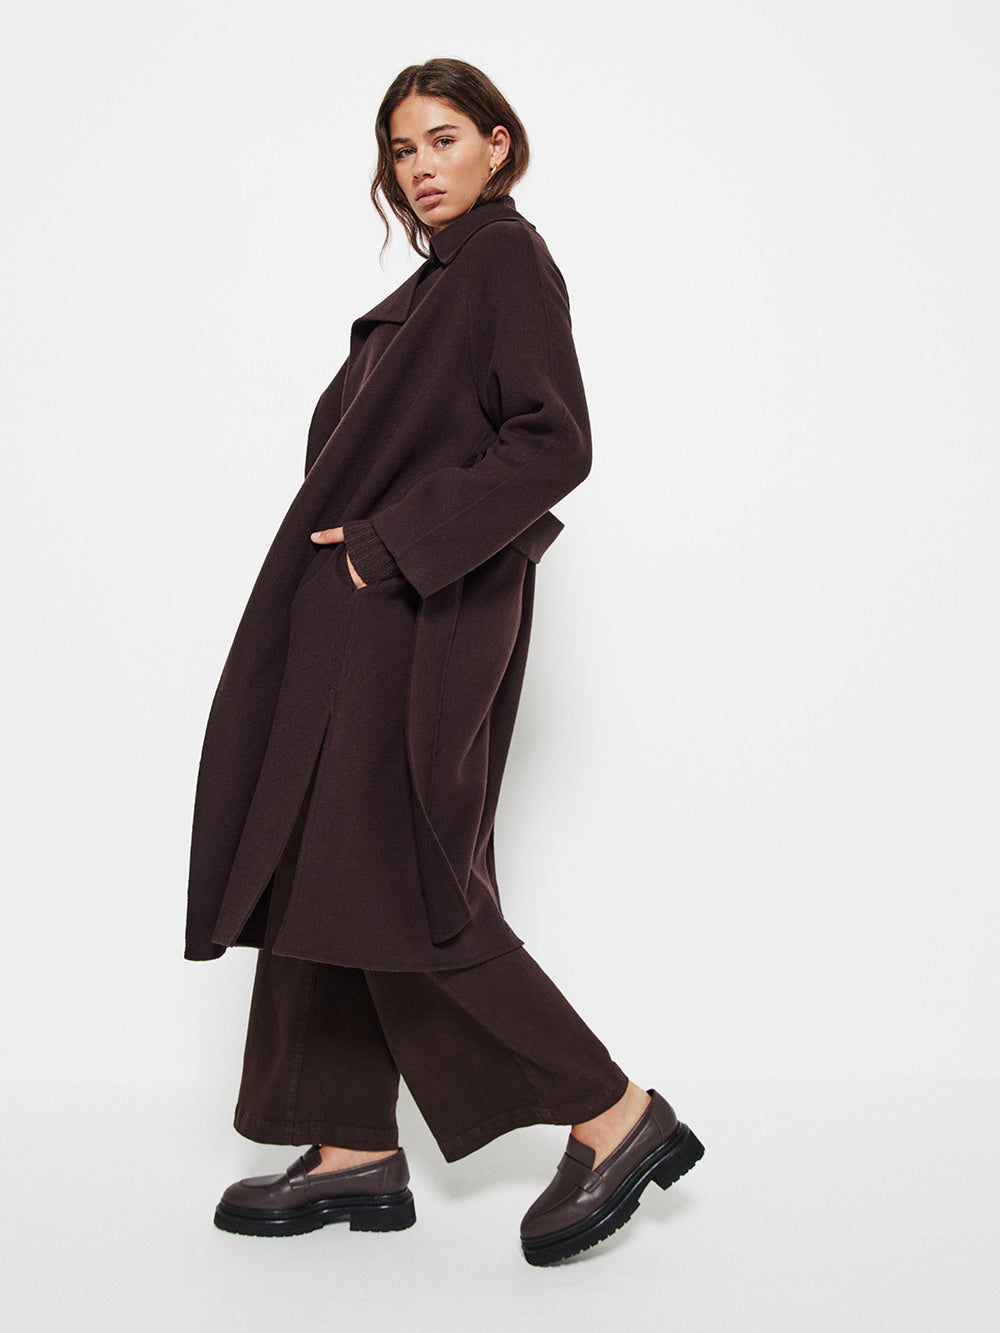 The Double Faced Wool Trench